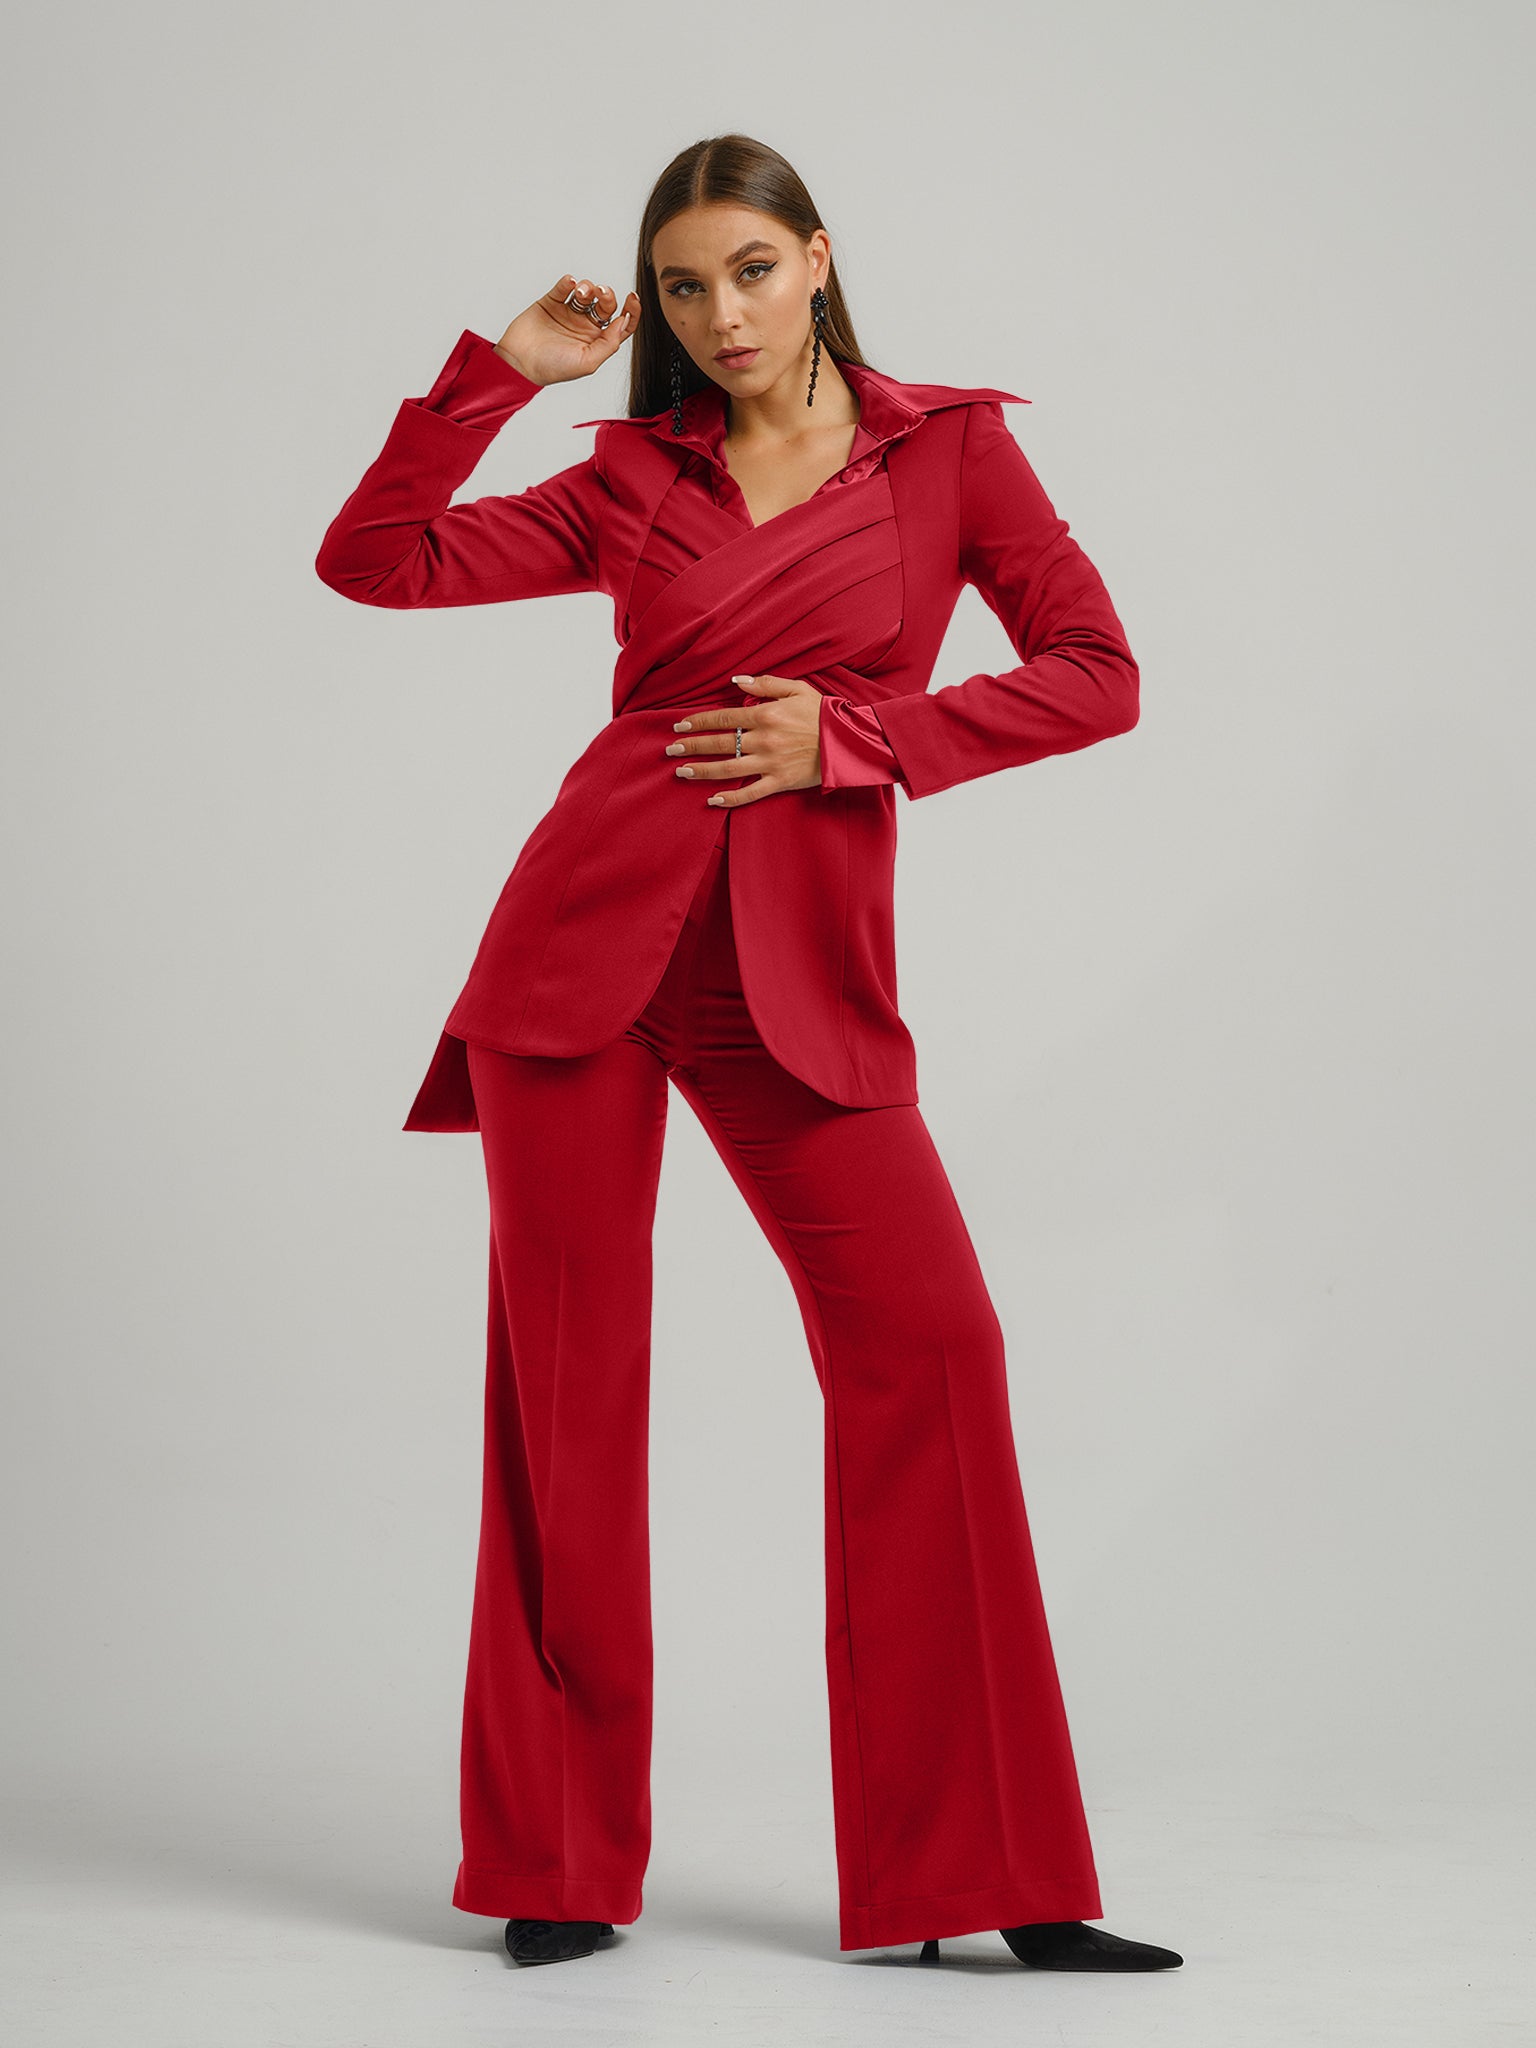 Tia Dorraine Fierce Red Statement Cross Wrap Blazer This thigh-length design reimagines the classic blazer with a generous helping of creative flair. The piece features an impressive cross drape panels that create a sweetheart neckline when tied at the ba